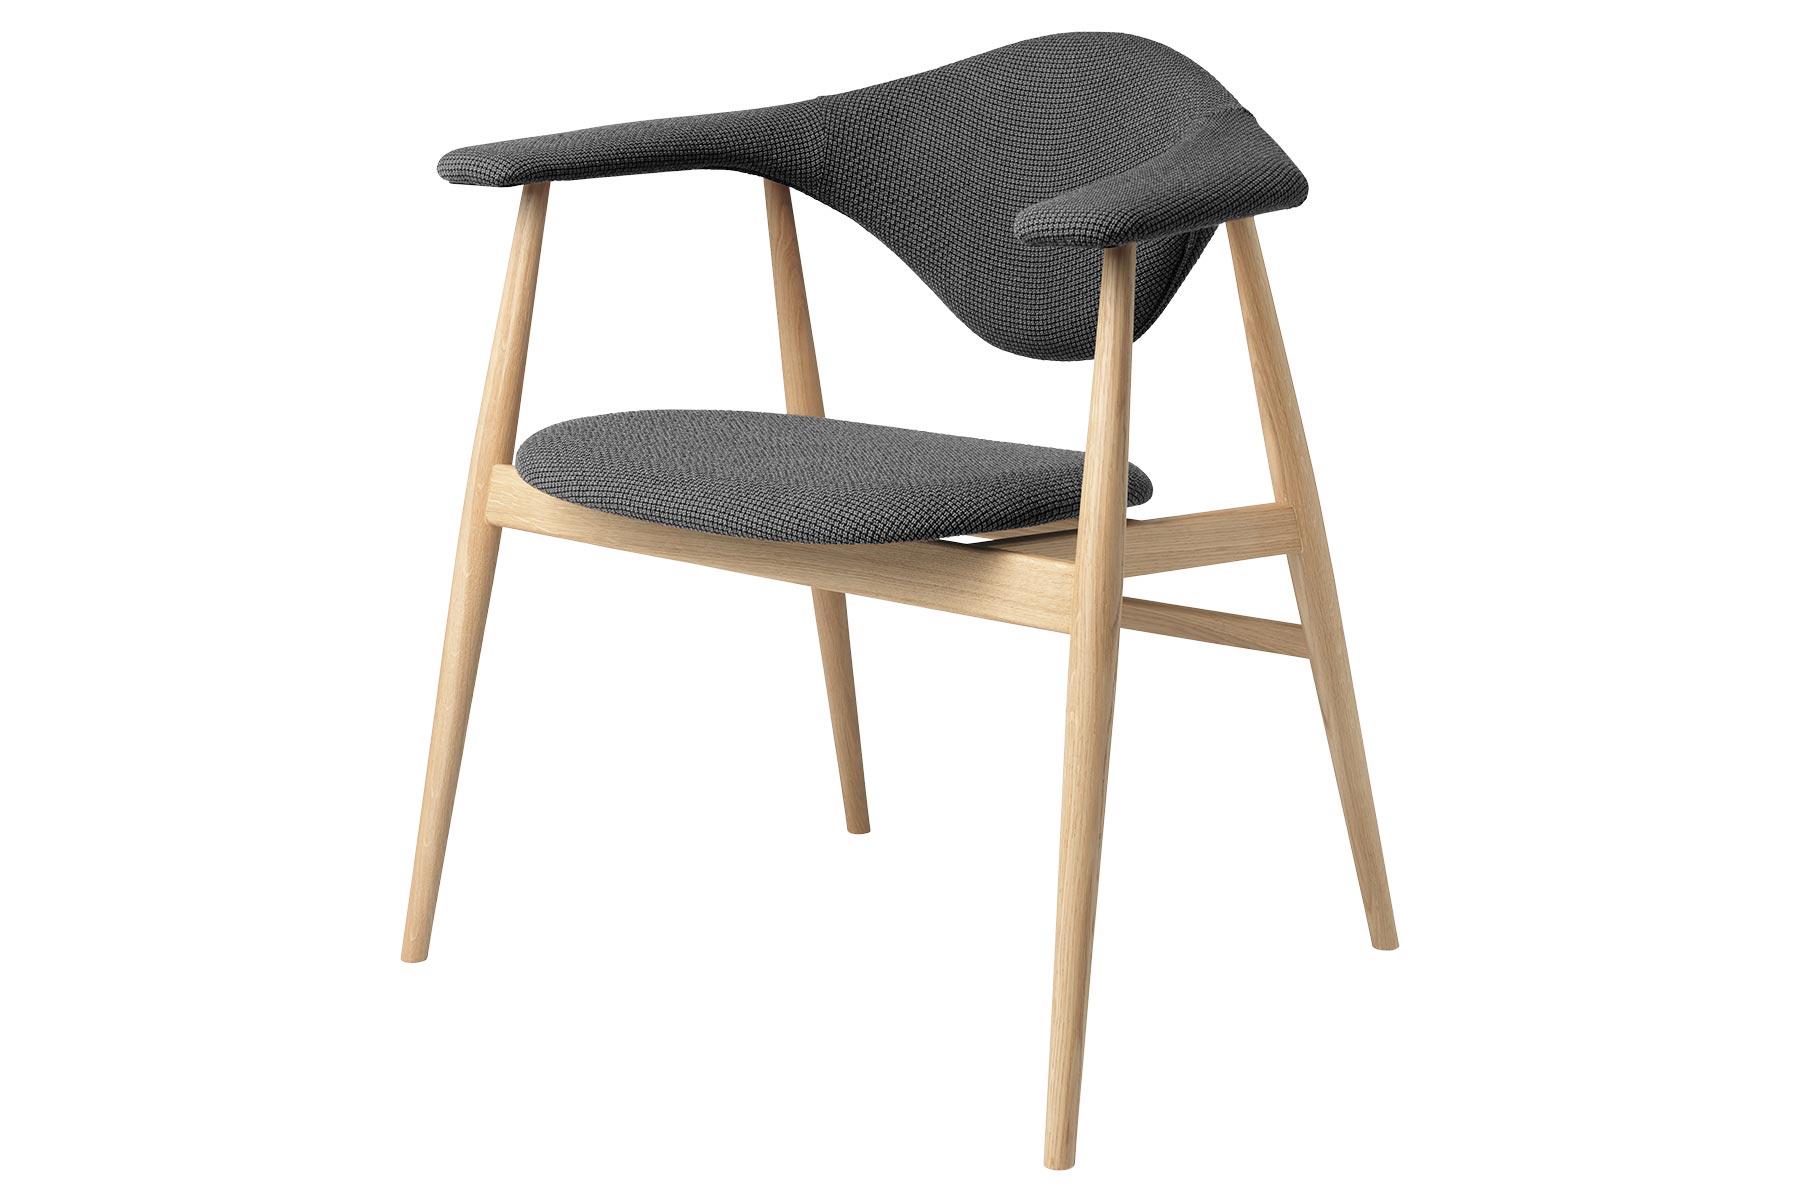 The Masculo chair by GamFratesi marries the idea of Danish elegance and simplicity with Italian refinement and playfulness. The backrest of Masculo is almost overly large, which call to mind a bull, and appears to float in the air and challenges all